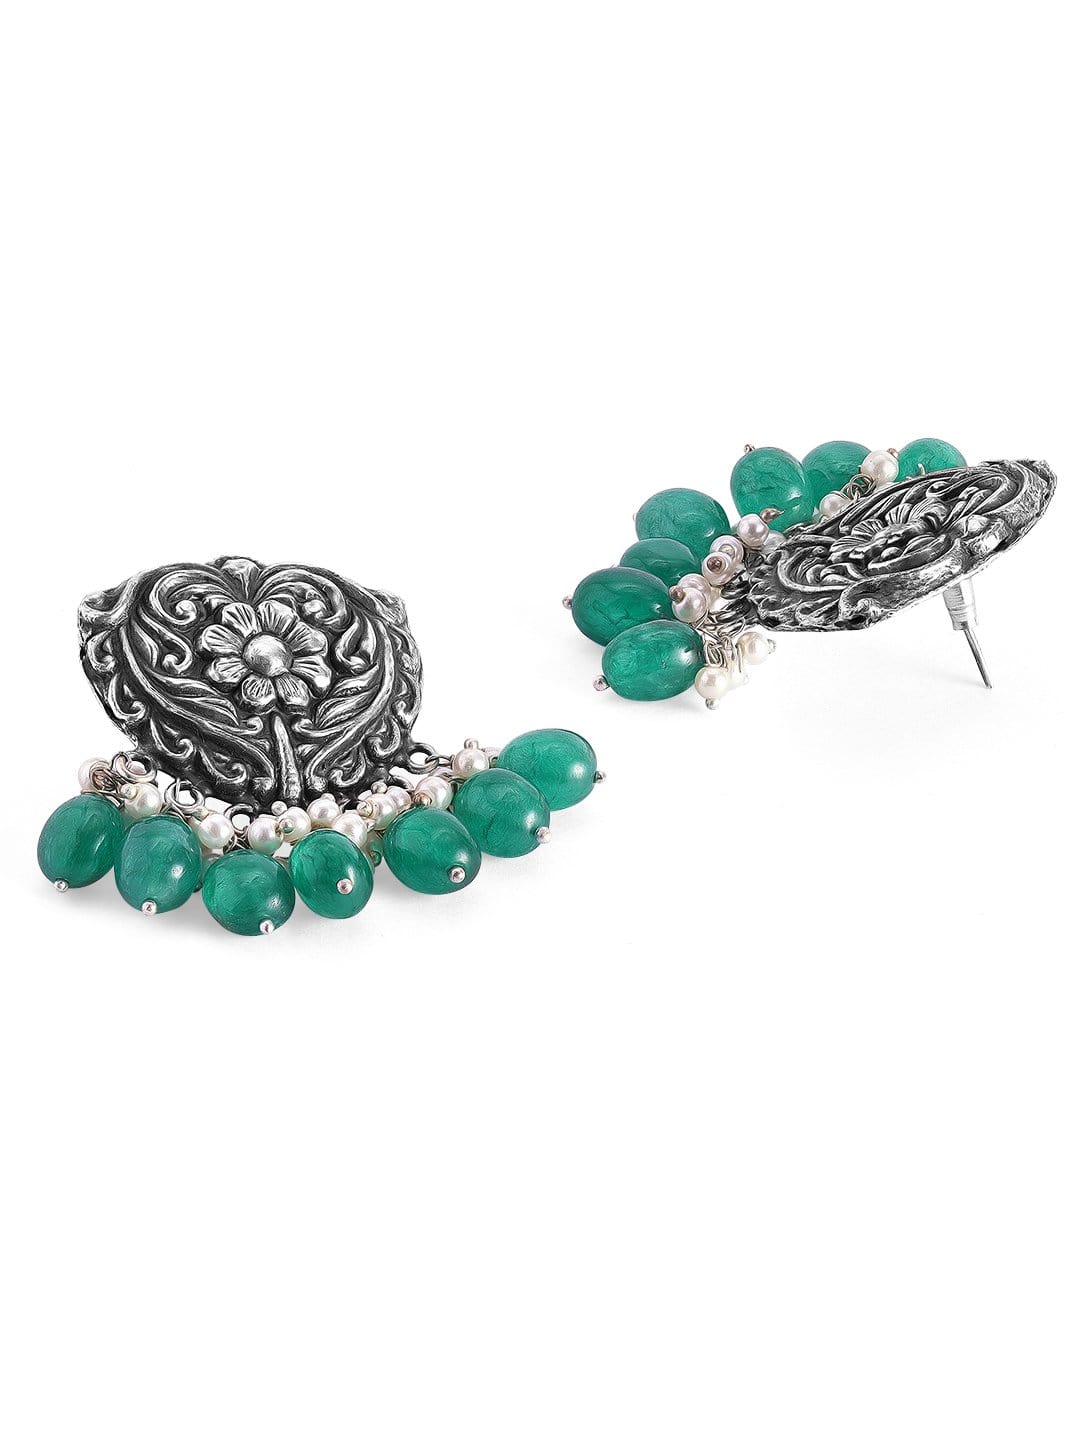 Rubans Oxidized Handcrafted Earrings with Green Beads Earrings